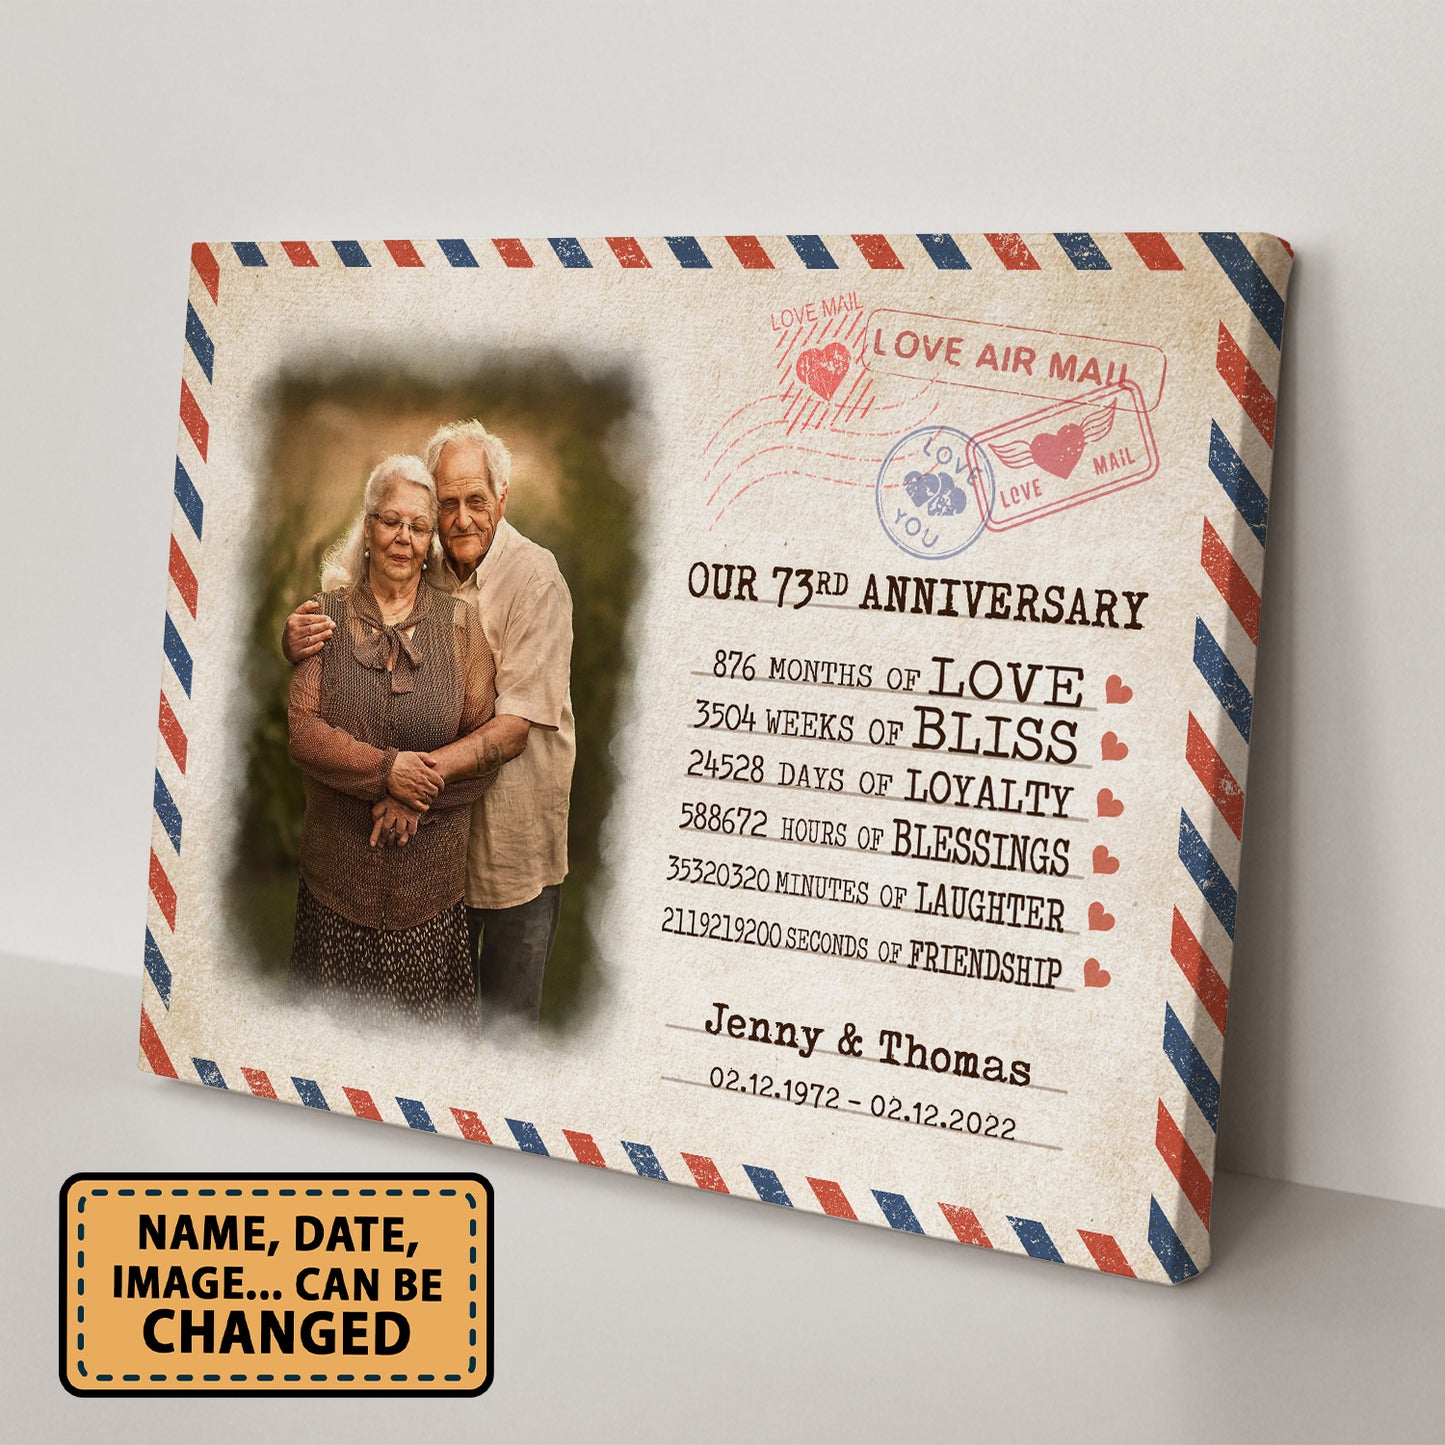 Our 73rd Anniversary Letter Valentine Gift Personalized Canvas